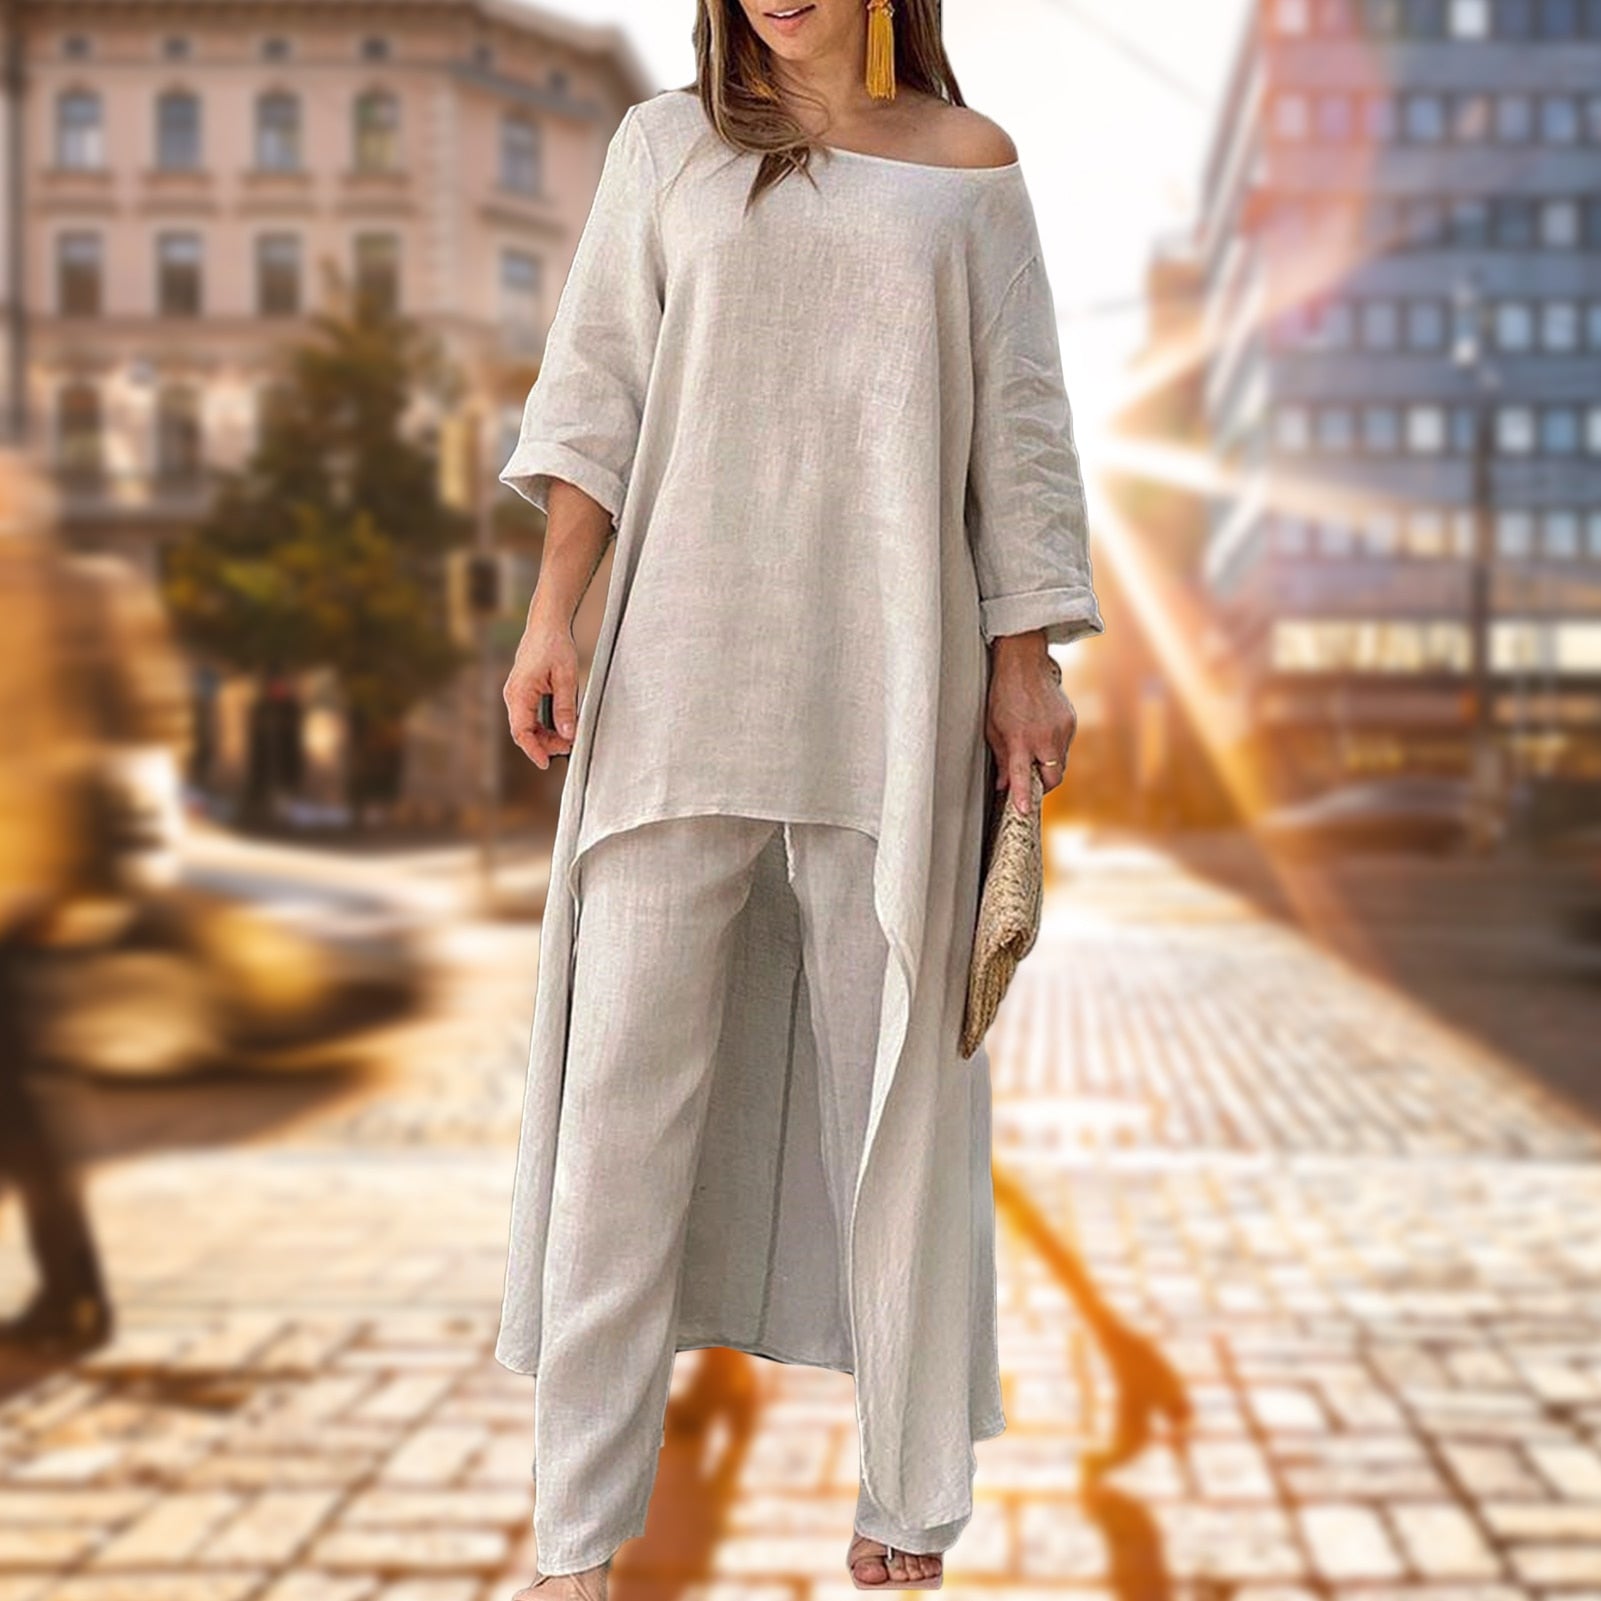 Discover more than 78 traditional palazzo pants online latest - in.eteachers